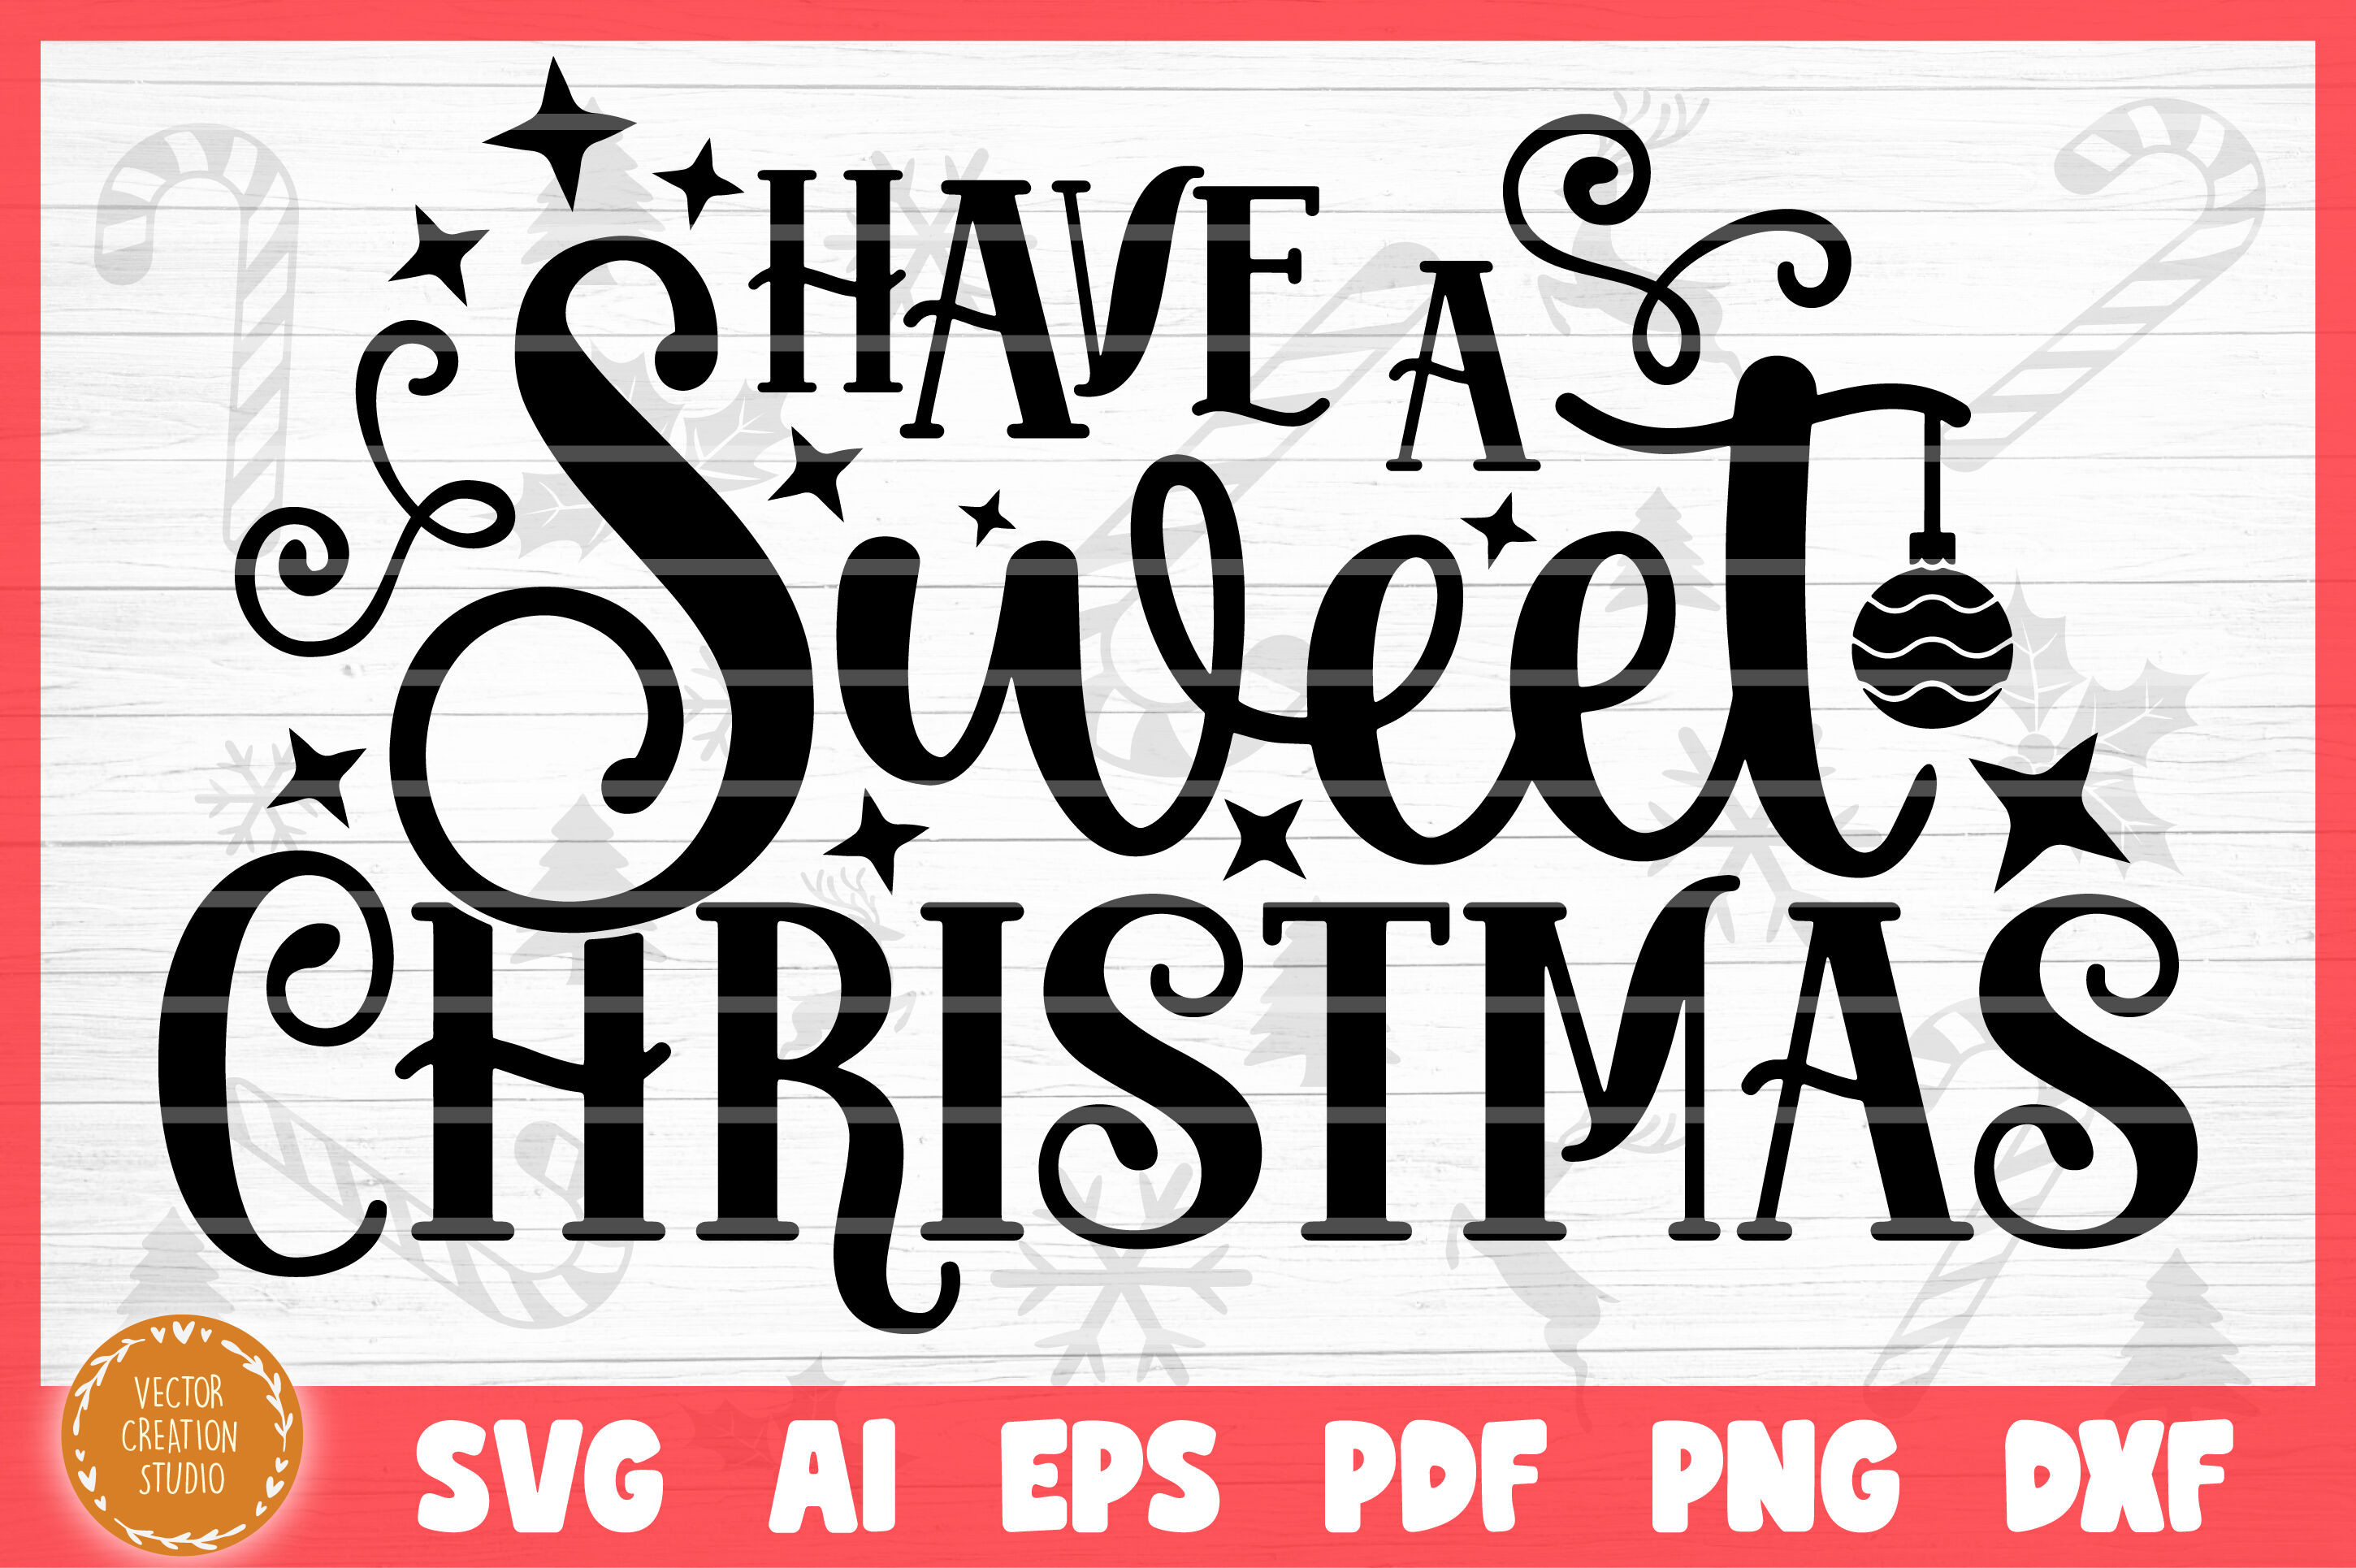 Have A Sweet Christmas Svg Cut File By Vectorcreationstudio Thehungryjpeg Com